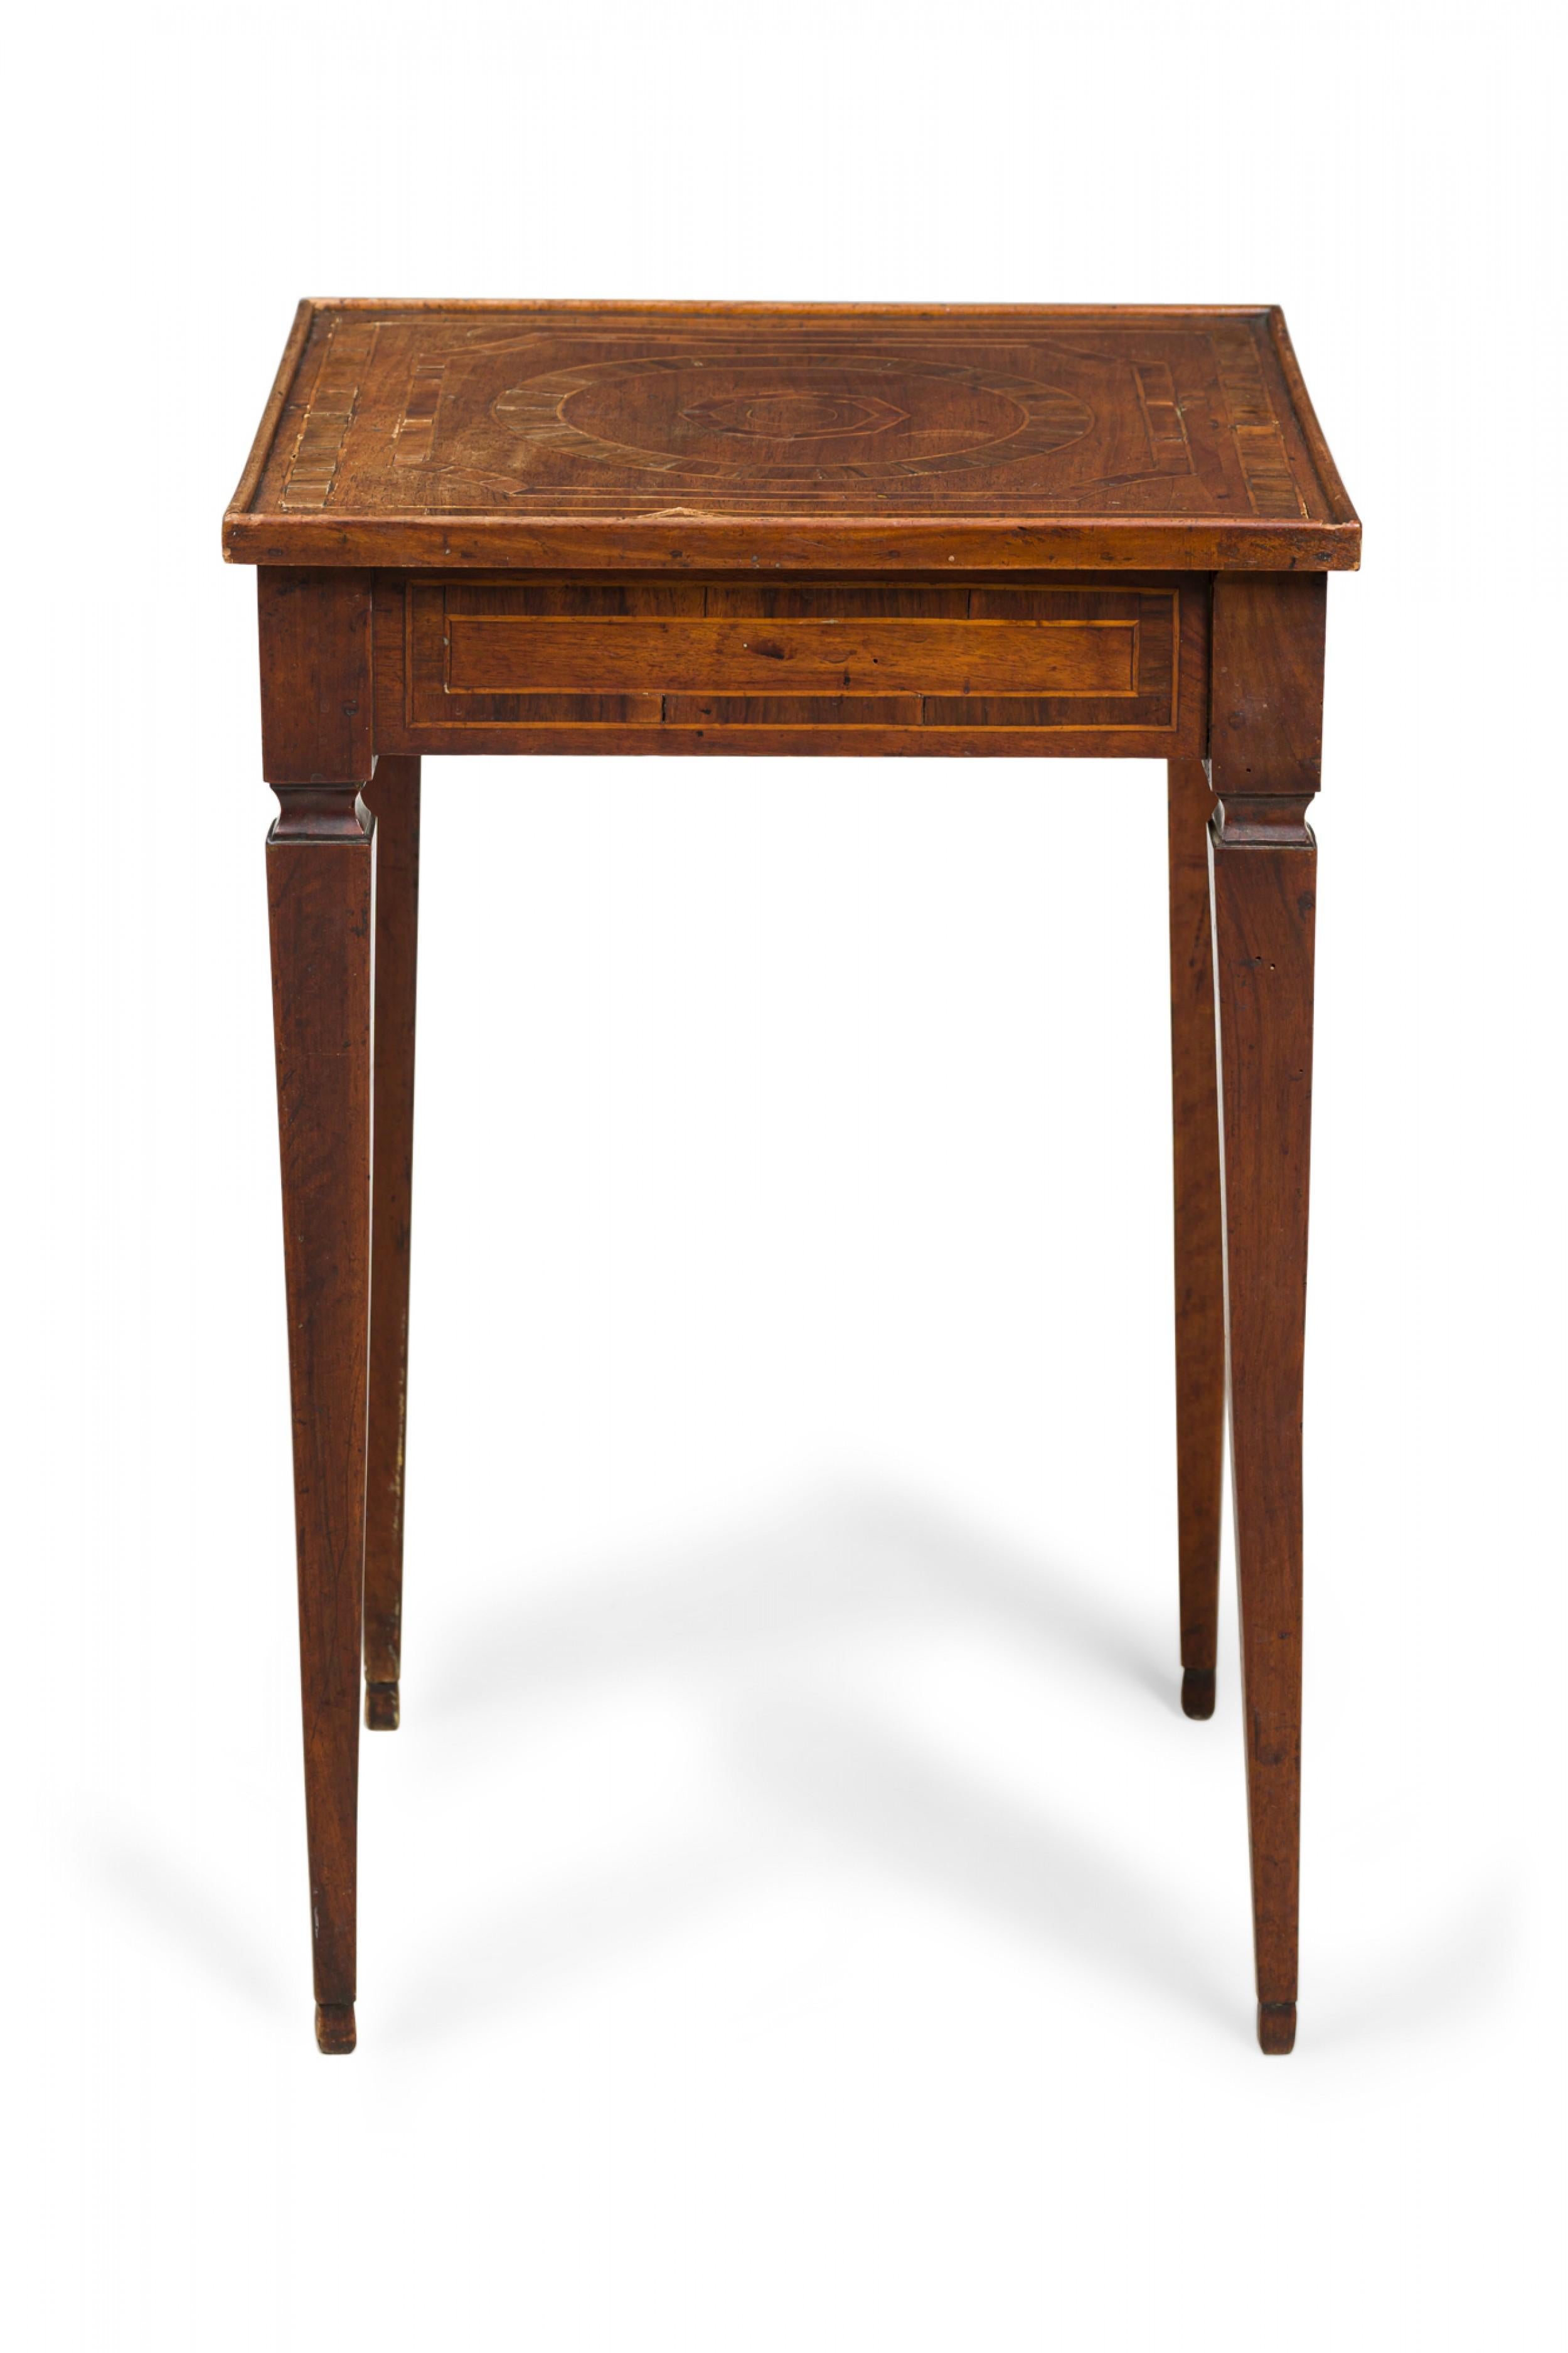 Neoclassical Italian Neoclassic Walnut Inlaid End Side Table For Sale